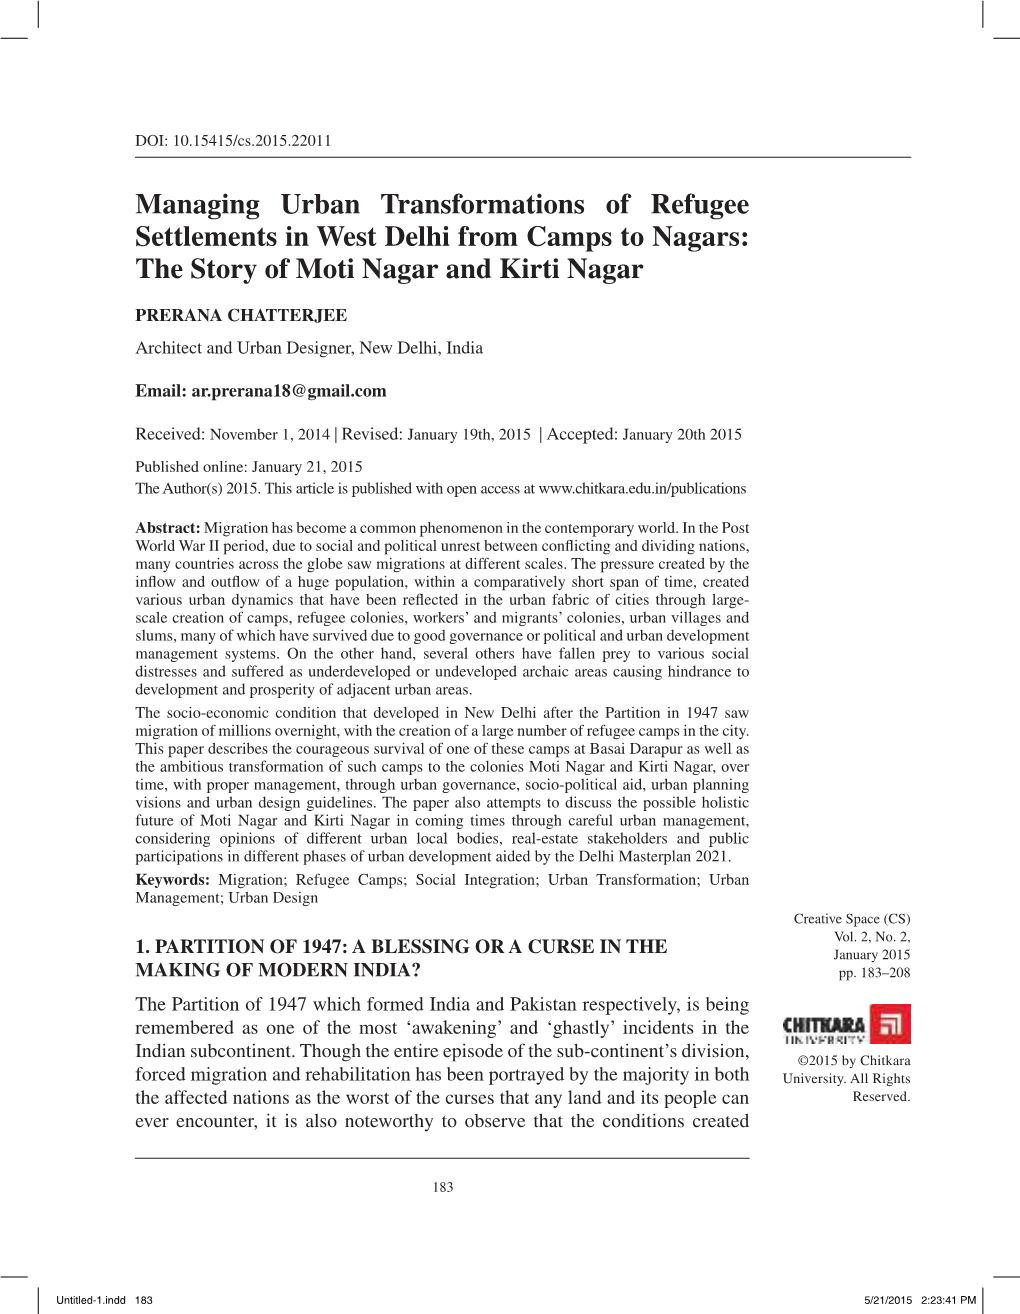 Managing Urban Transformations of Refugee Settlements in West Delhi from Camps to Nagars: the Story of Moti Nagar and Kirti Nagar